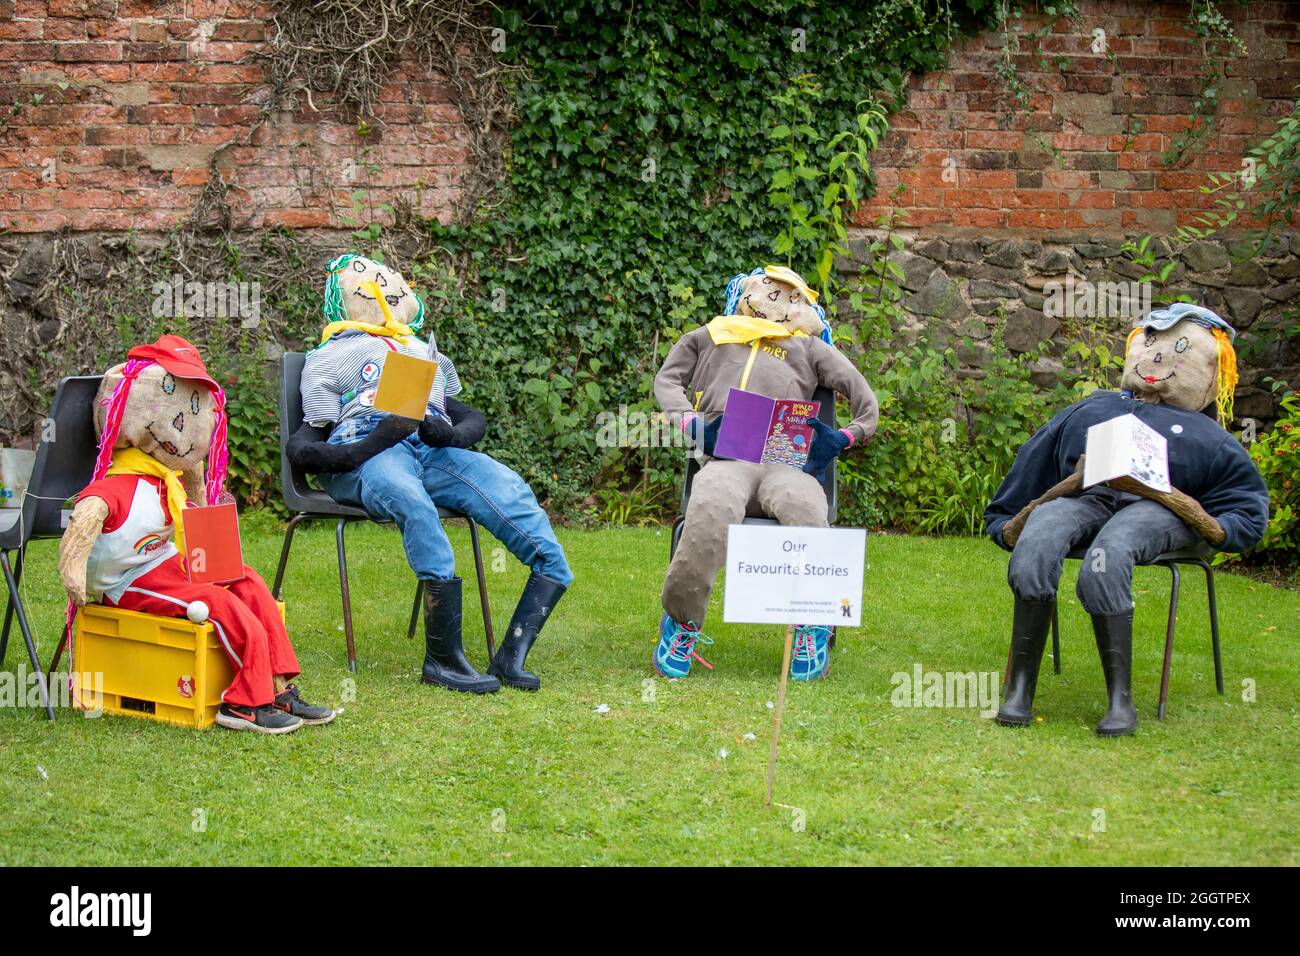 The 2021 Desford village Scarecrow festval taking place at the end of August. The event was cancelled the previous year due to the Pandemic. The event takes place for three days over the bank holiday weekend. Reading resident scarecrows on Main Street. Stock Photo